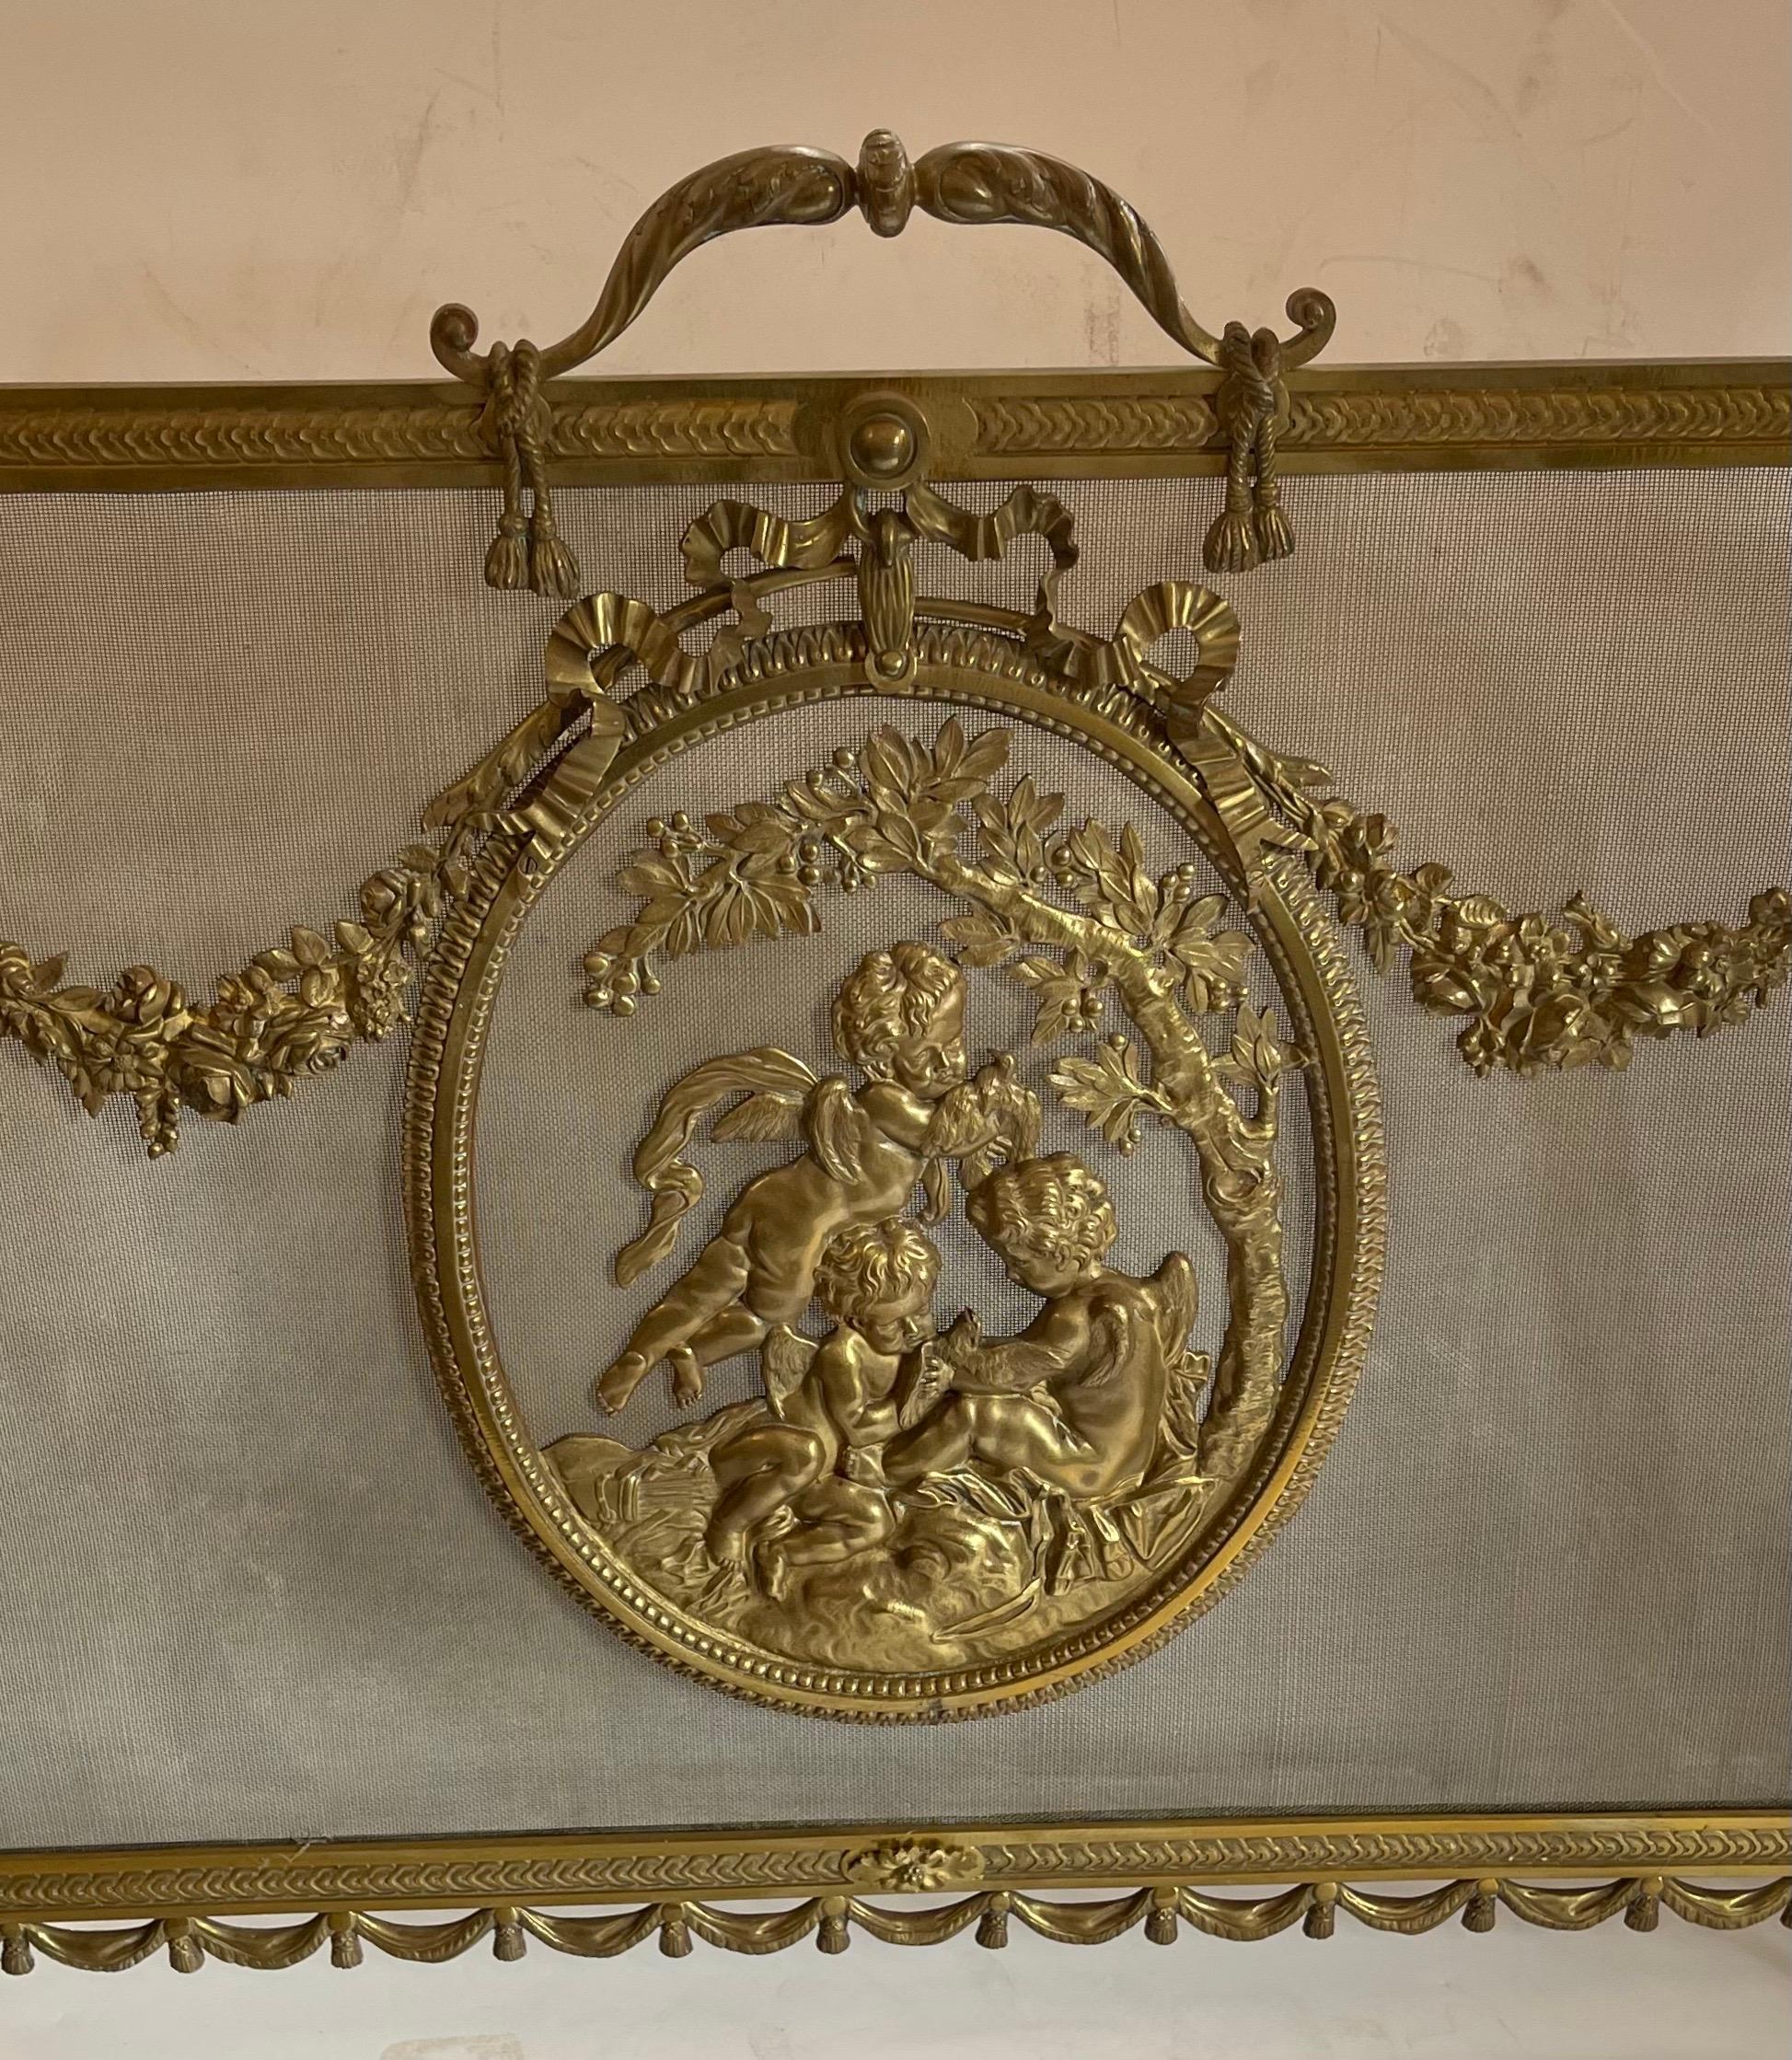 A wonderful French Cherub Medallion 19th century Louis XV style gilt-bronze with garland bow & swag fireplace screen.